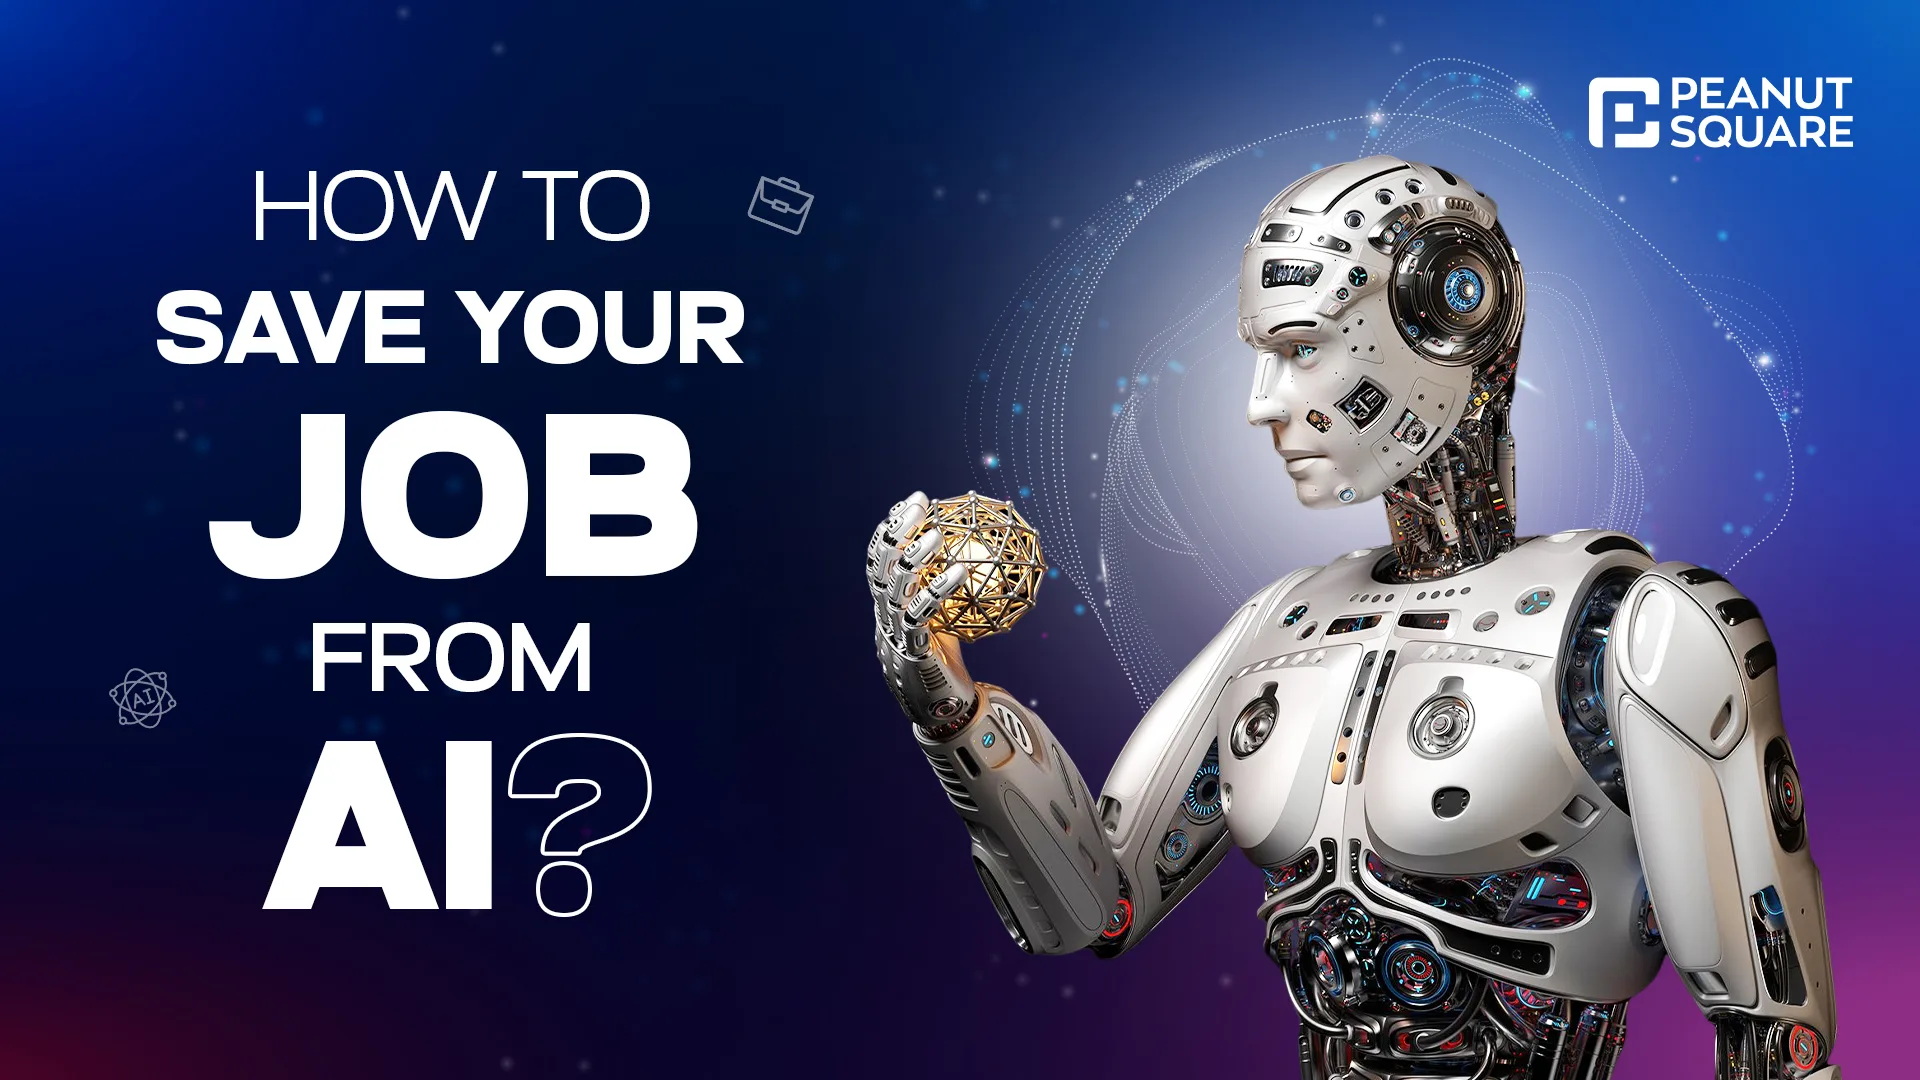 Save your job from AI